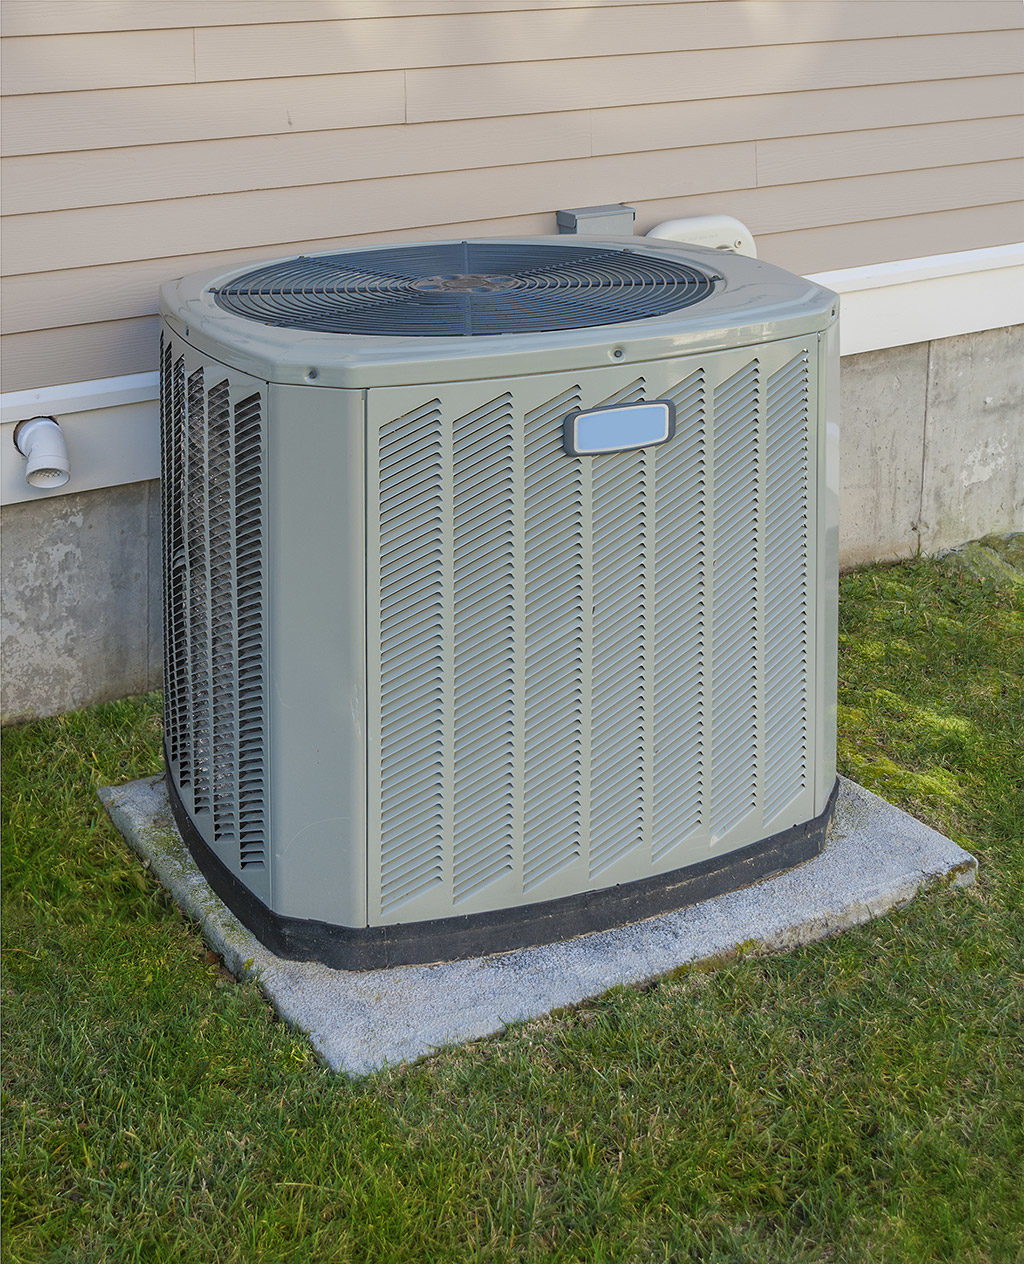 Basic Information About an Air Conditioner | Air Conditioning Repair Service in Azle, TX